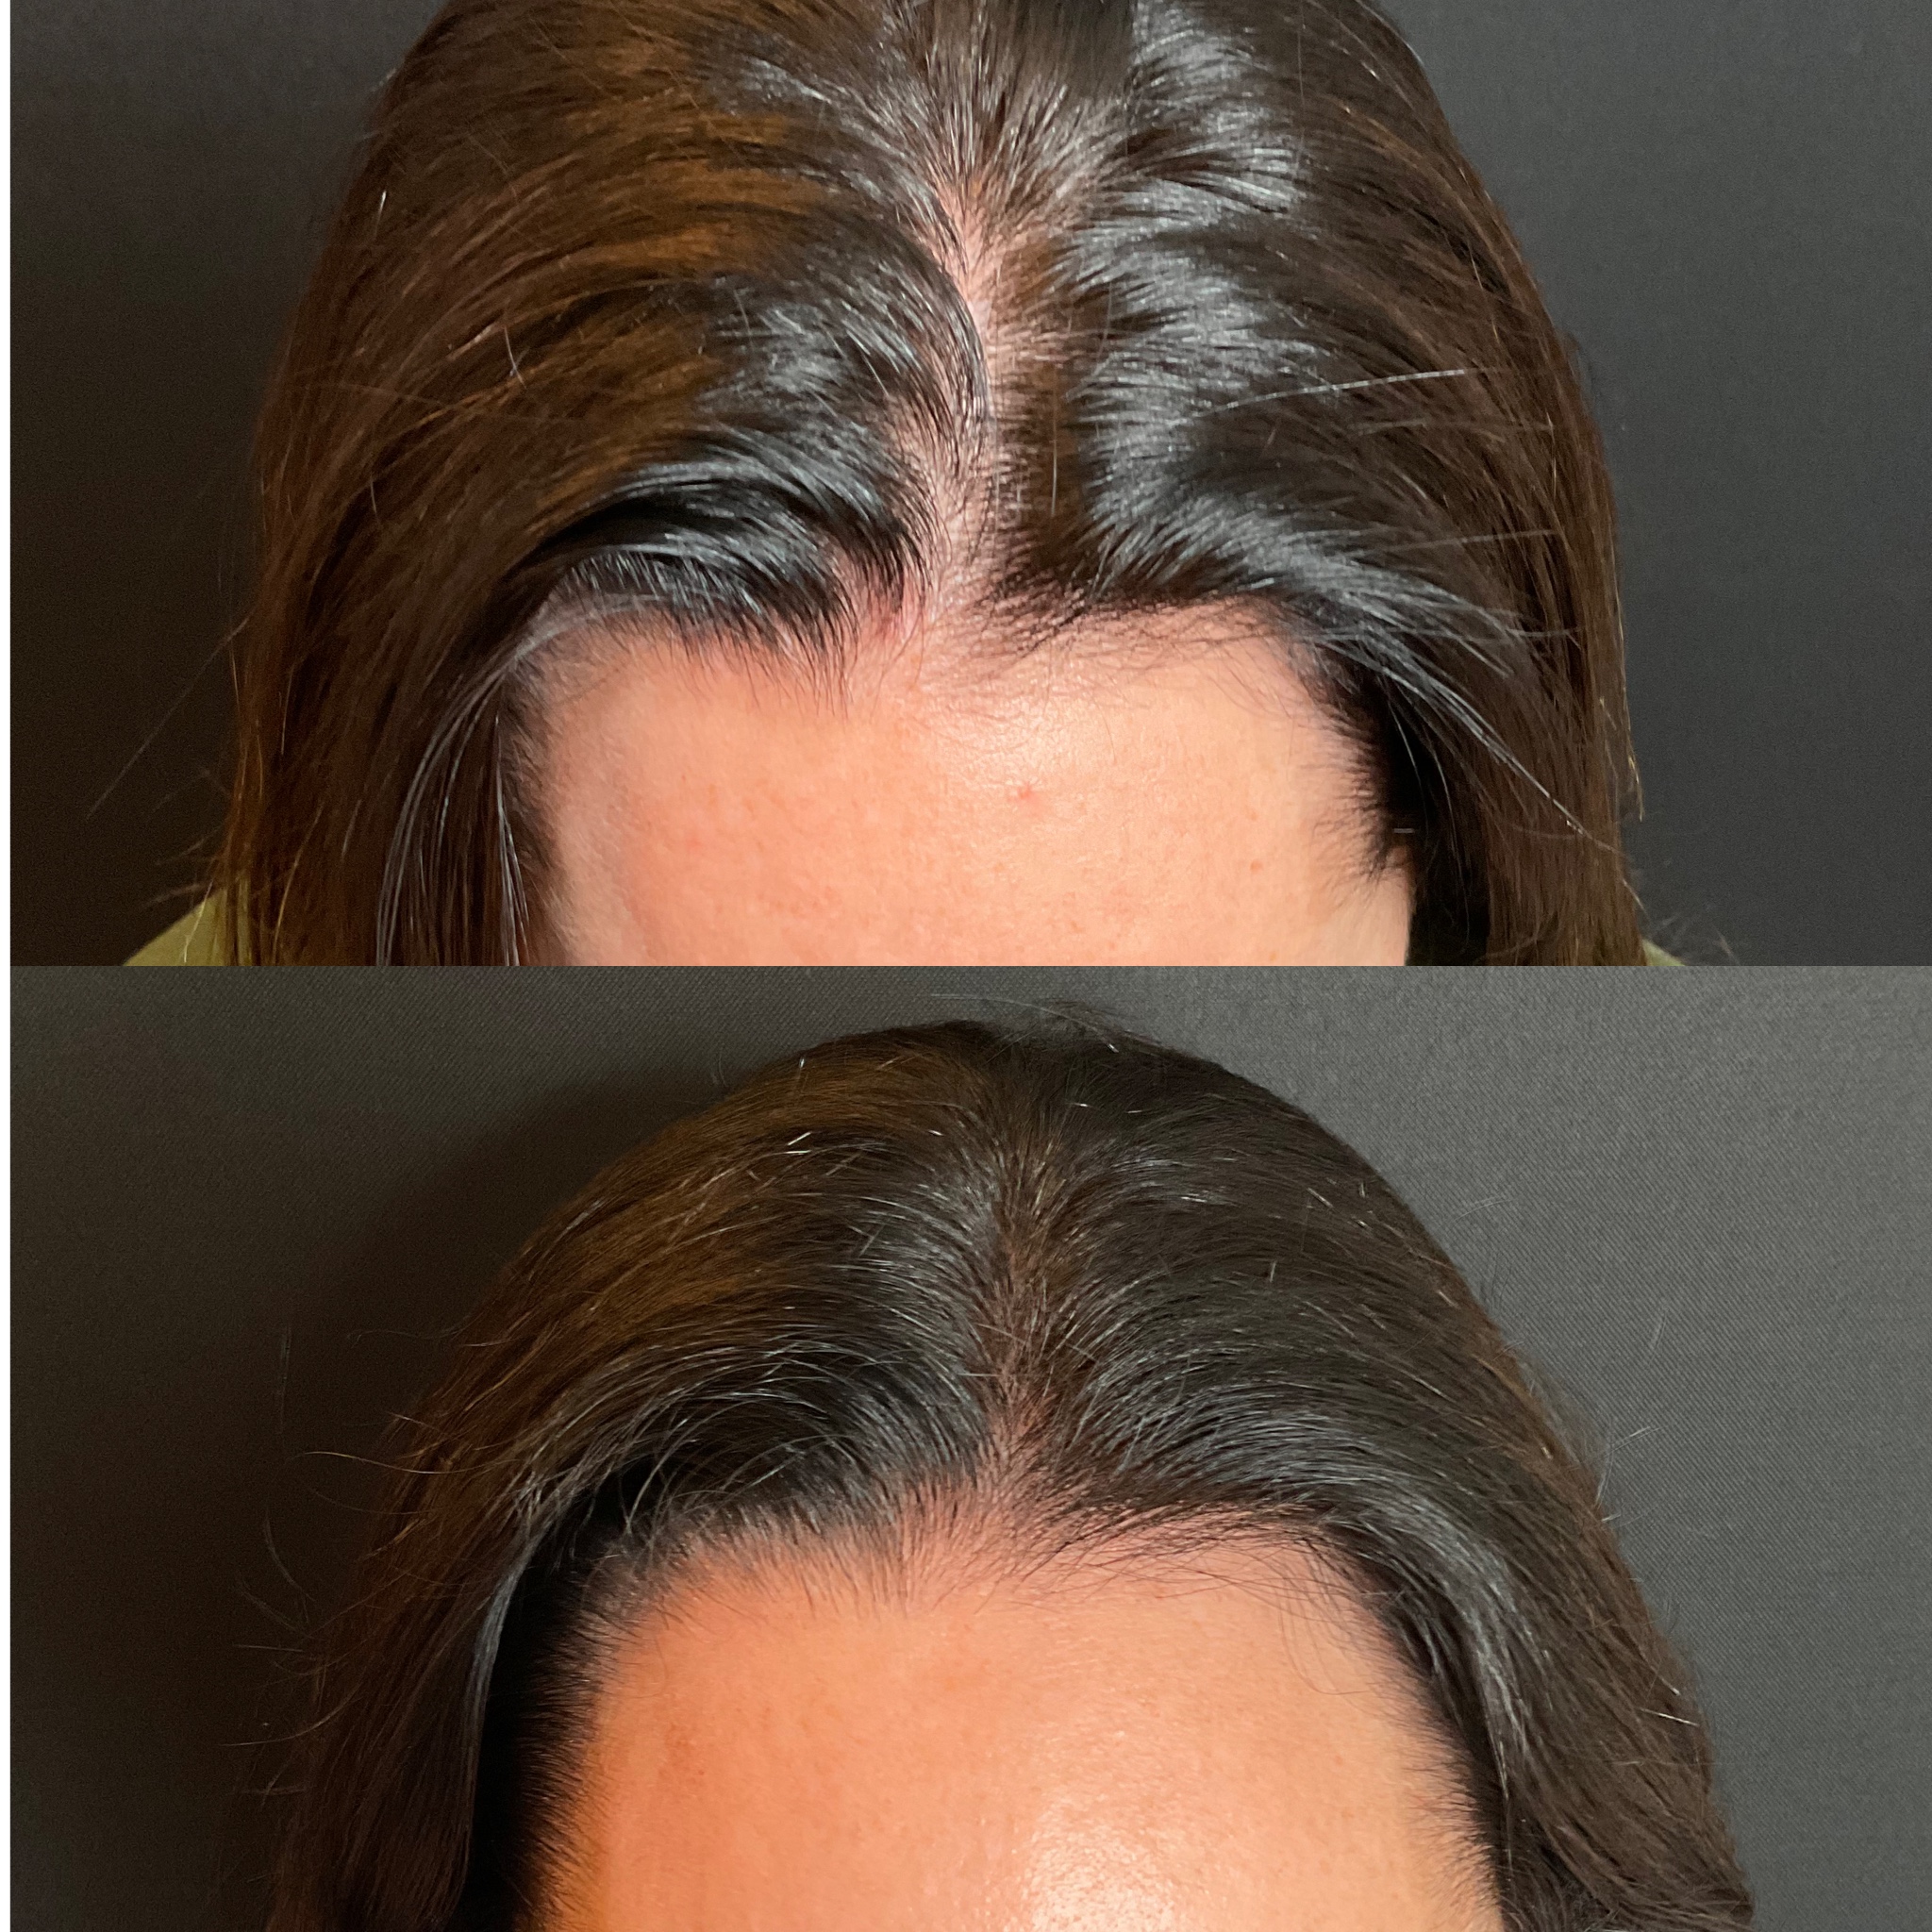 Before and After PRP hair 2 treatments